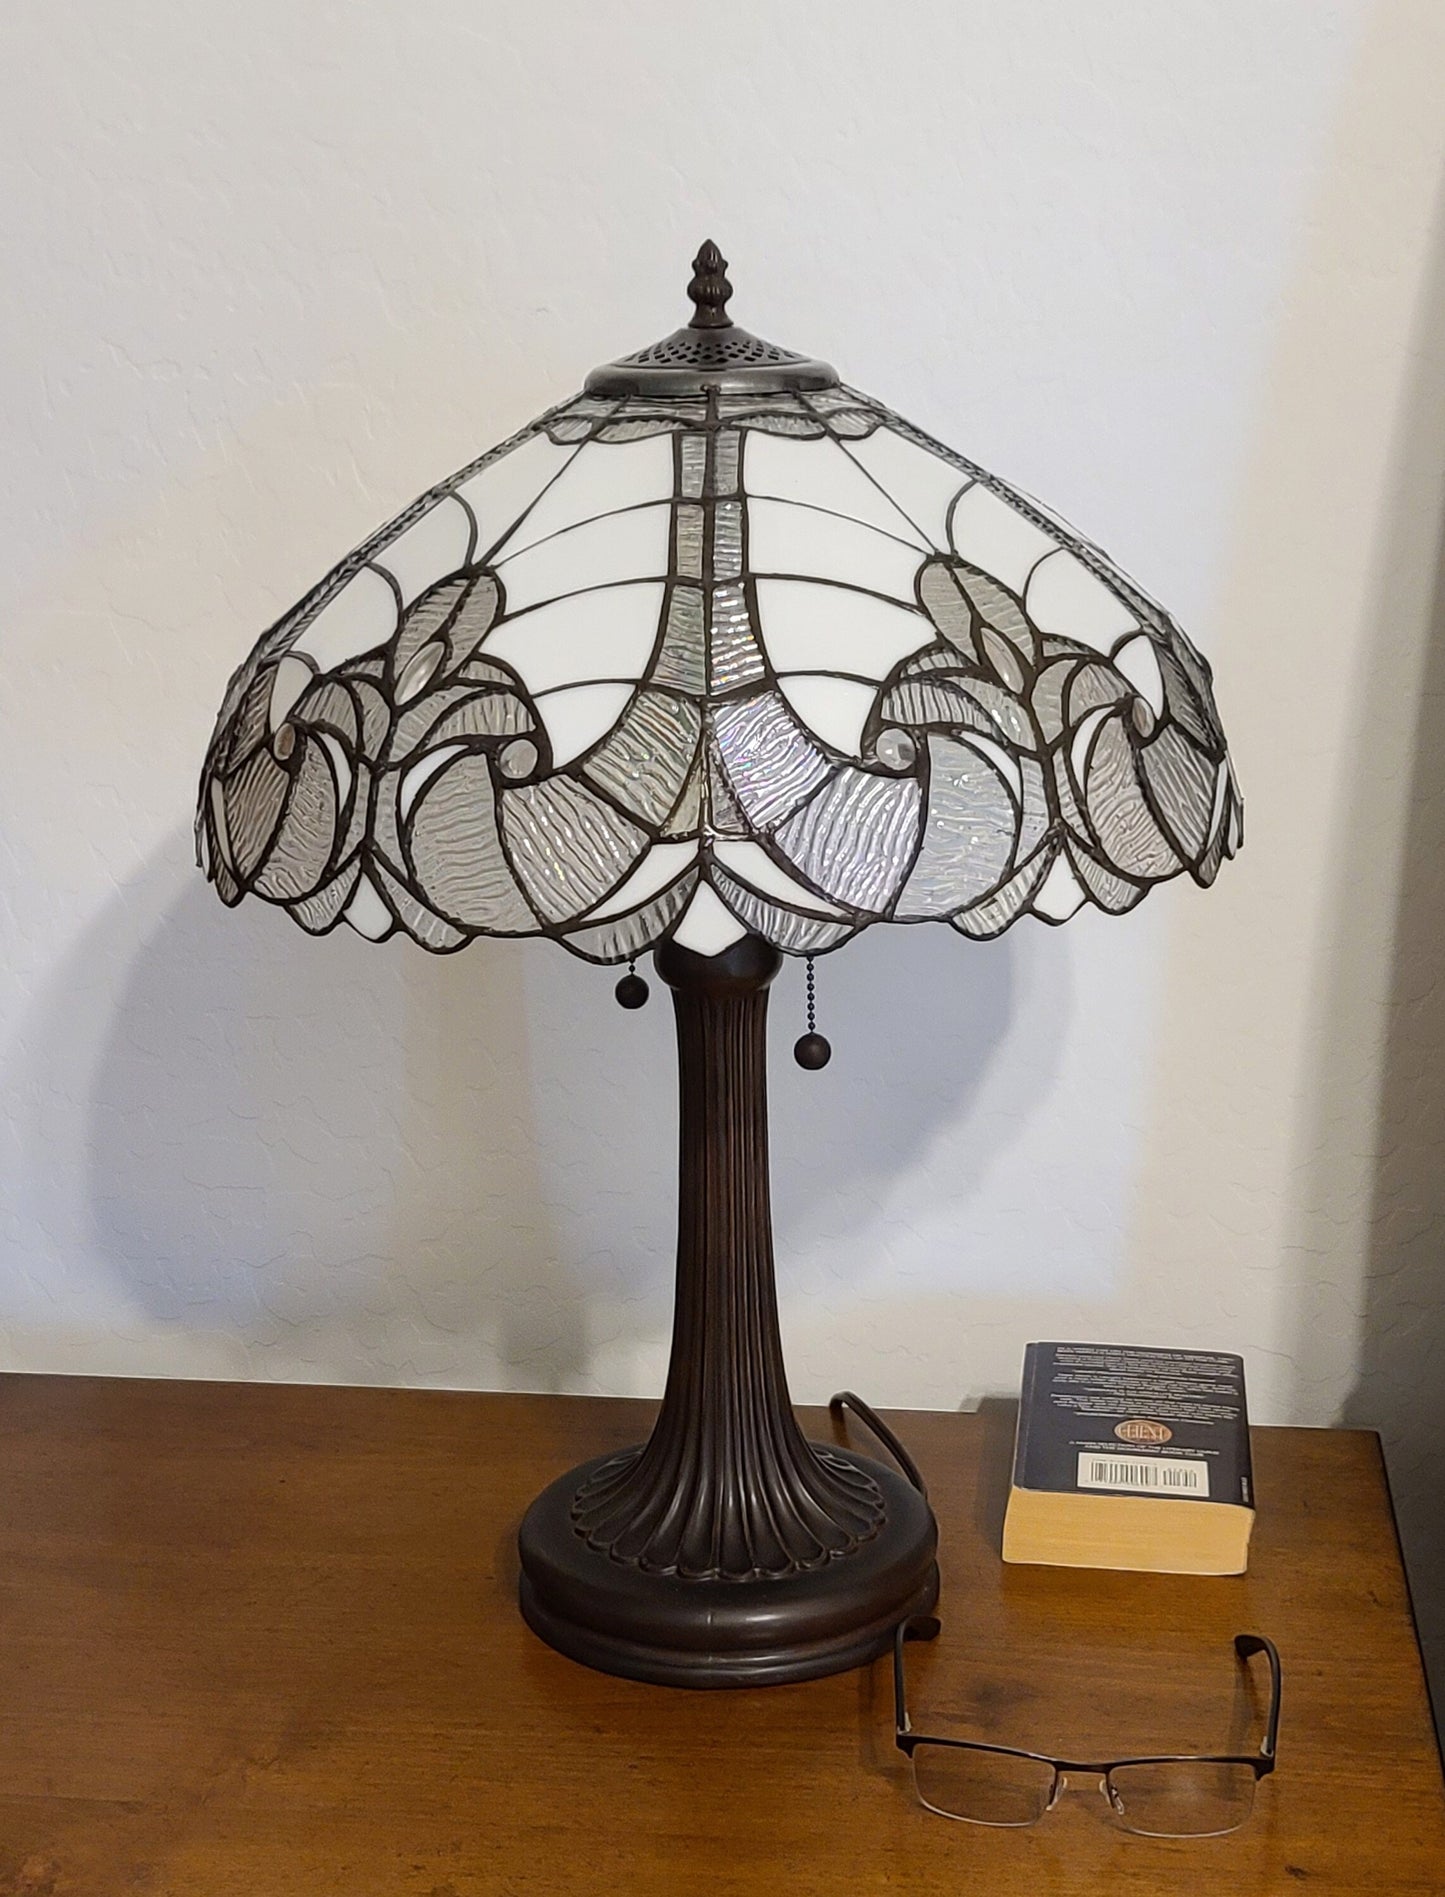 23" Stained Glass Two Light Vintage Antique Accent Table Lamp